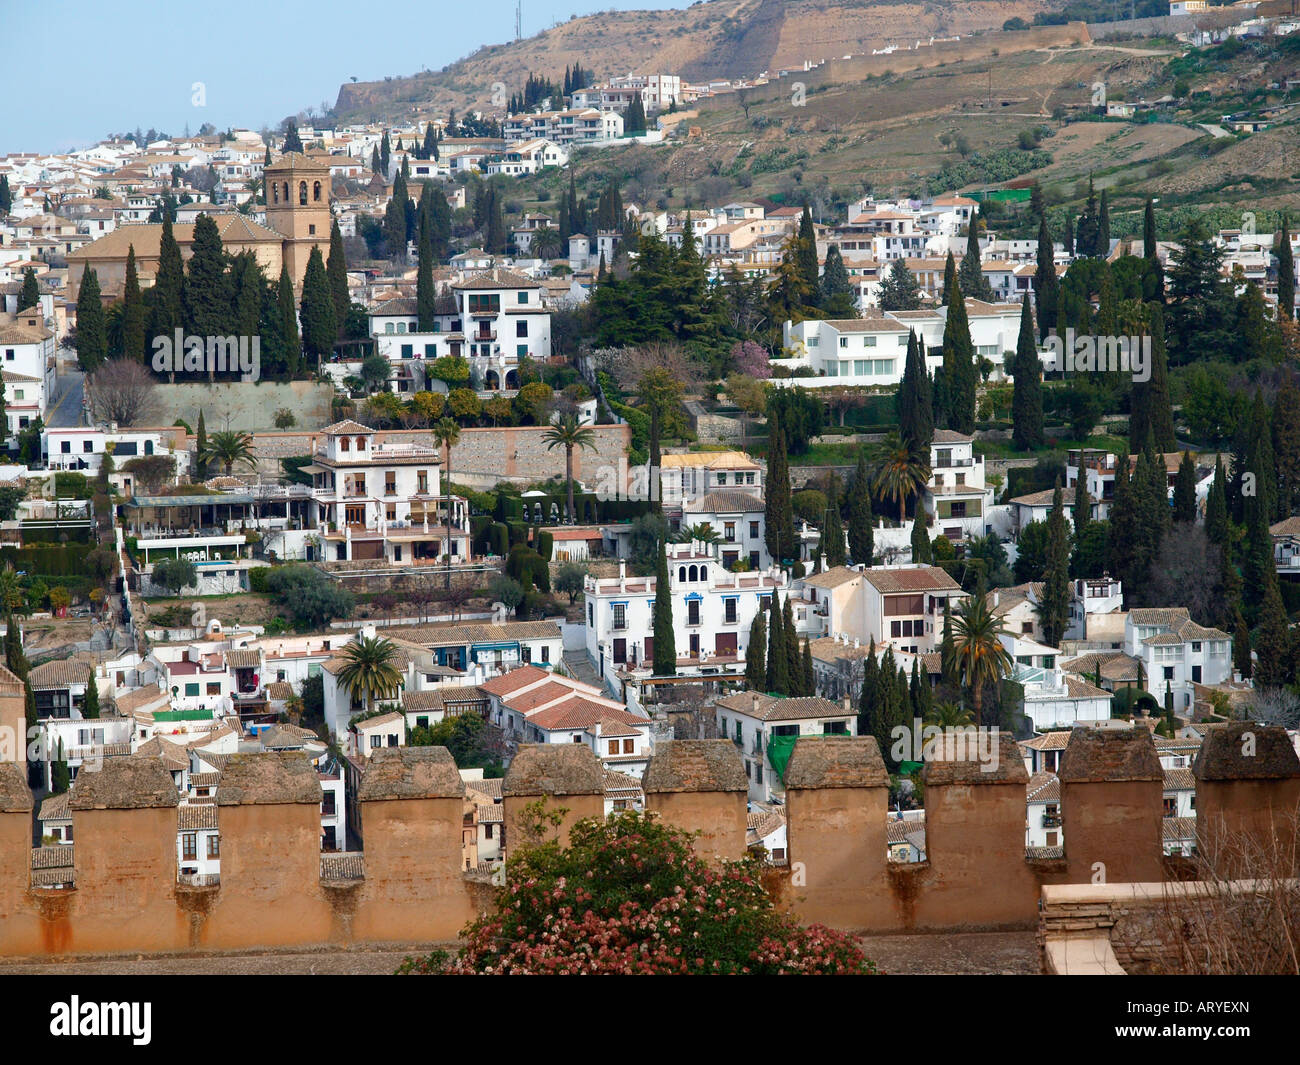 View of Albaicin district rooftops showing the characteristic Moorish architecture of the area.  Granada Andalucia Spain Stock Photo